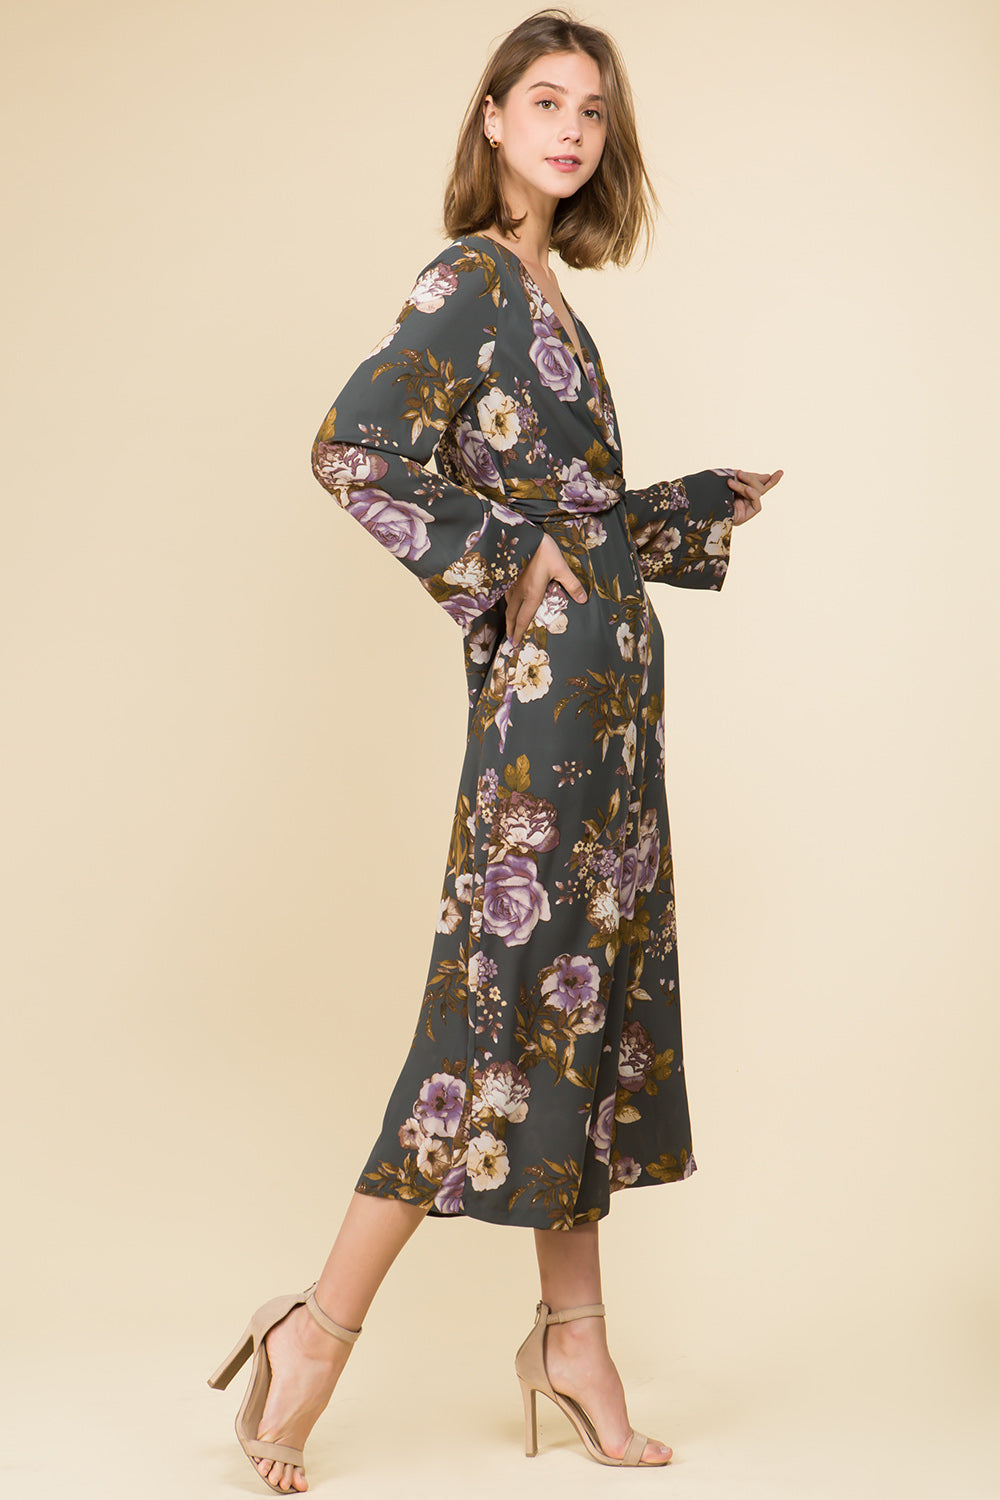 LONG SLEEVE TWIST FRONT MID CALF LENGTH JUMPSUIT IN FLORAL PRINT